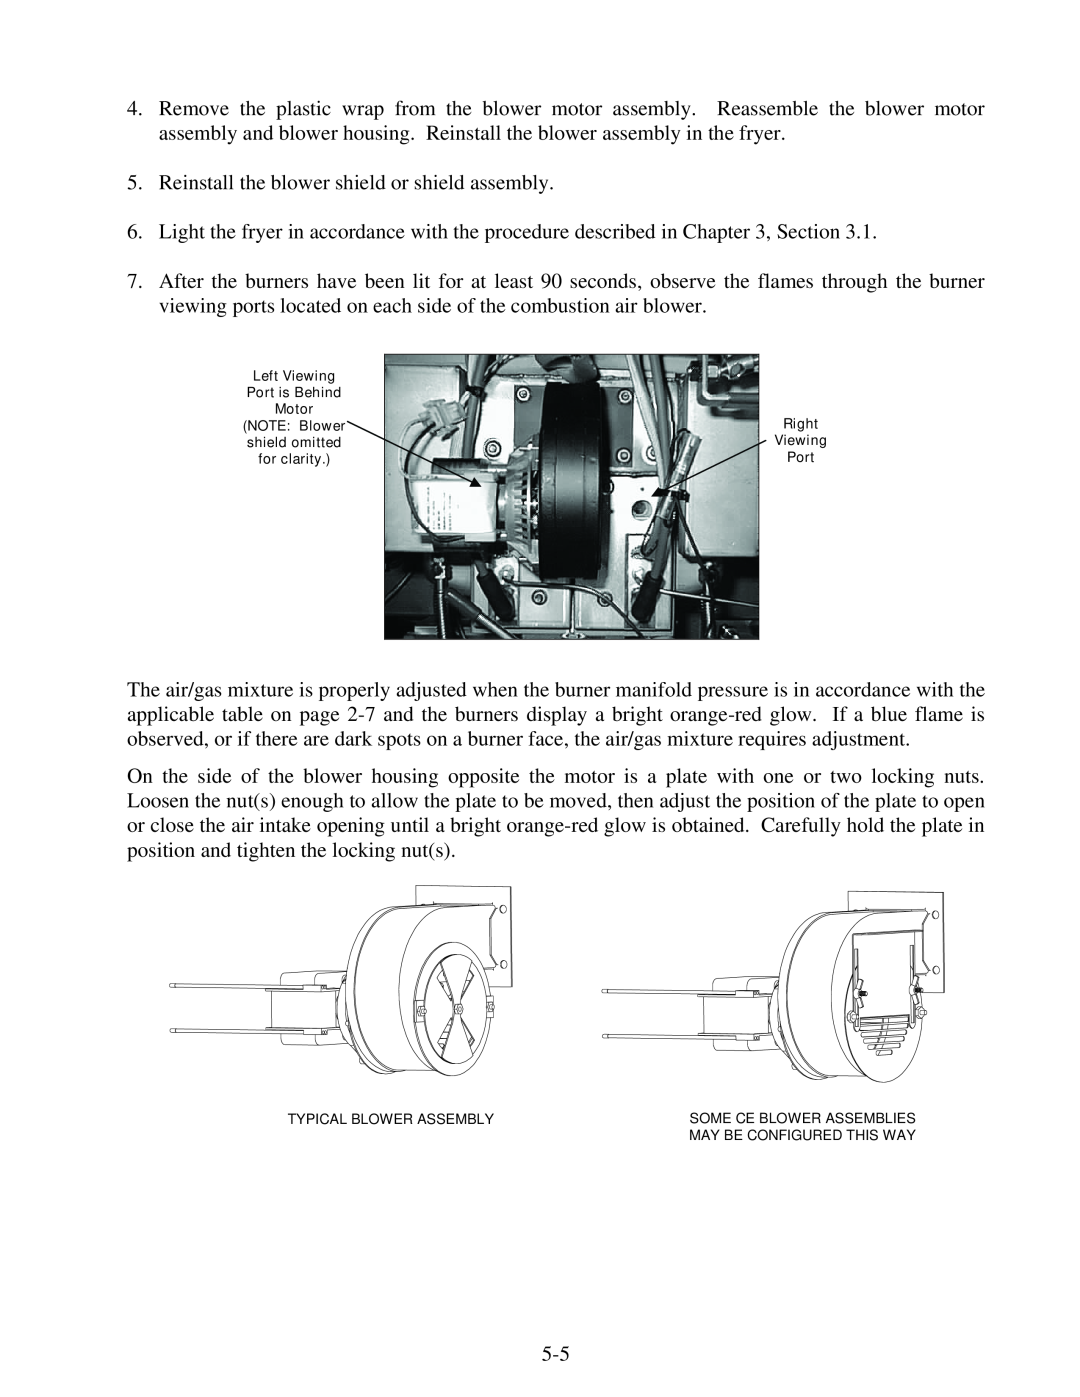 Frymaster 8195991 operation manual Reinstall the blower shield or shield assembly 